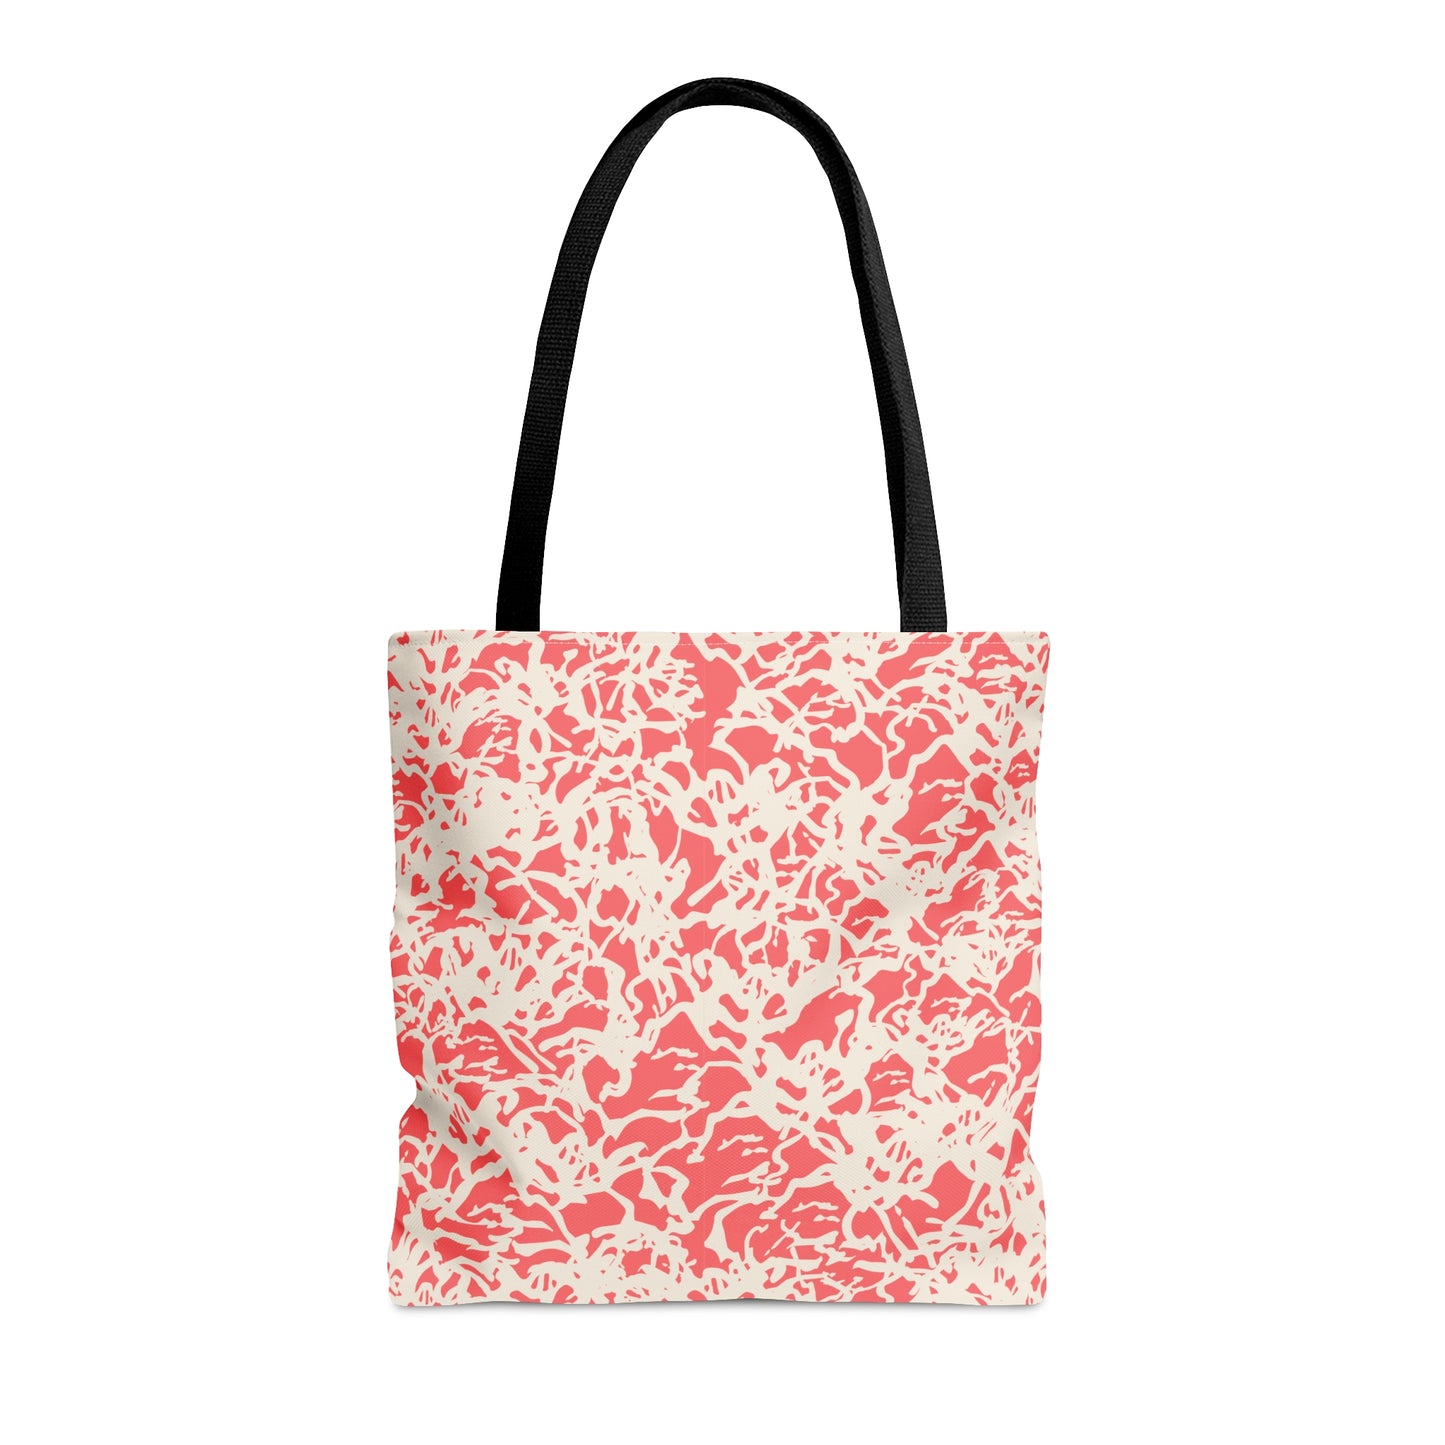 Fleeting Floral Crowns Peach and Cream Tote Bag